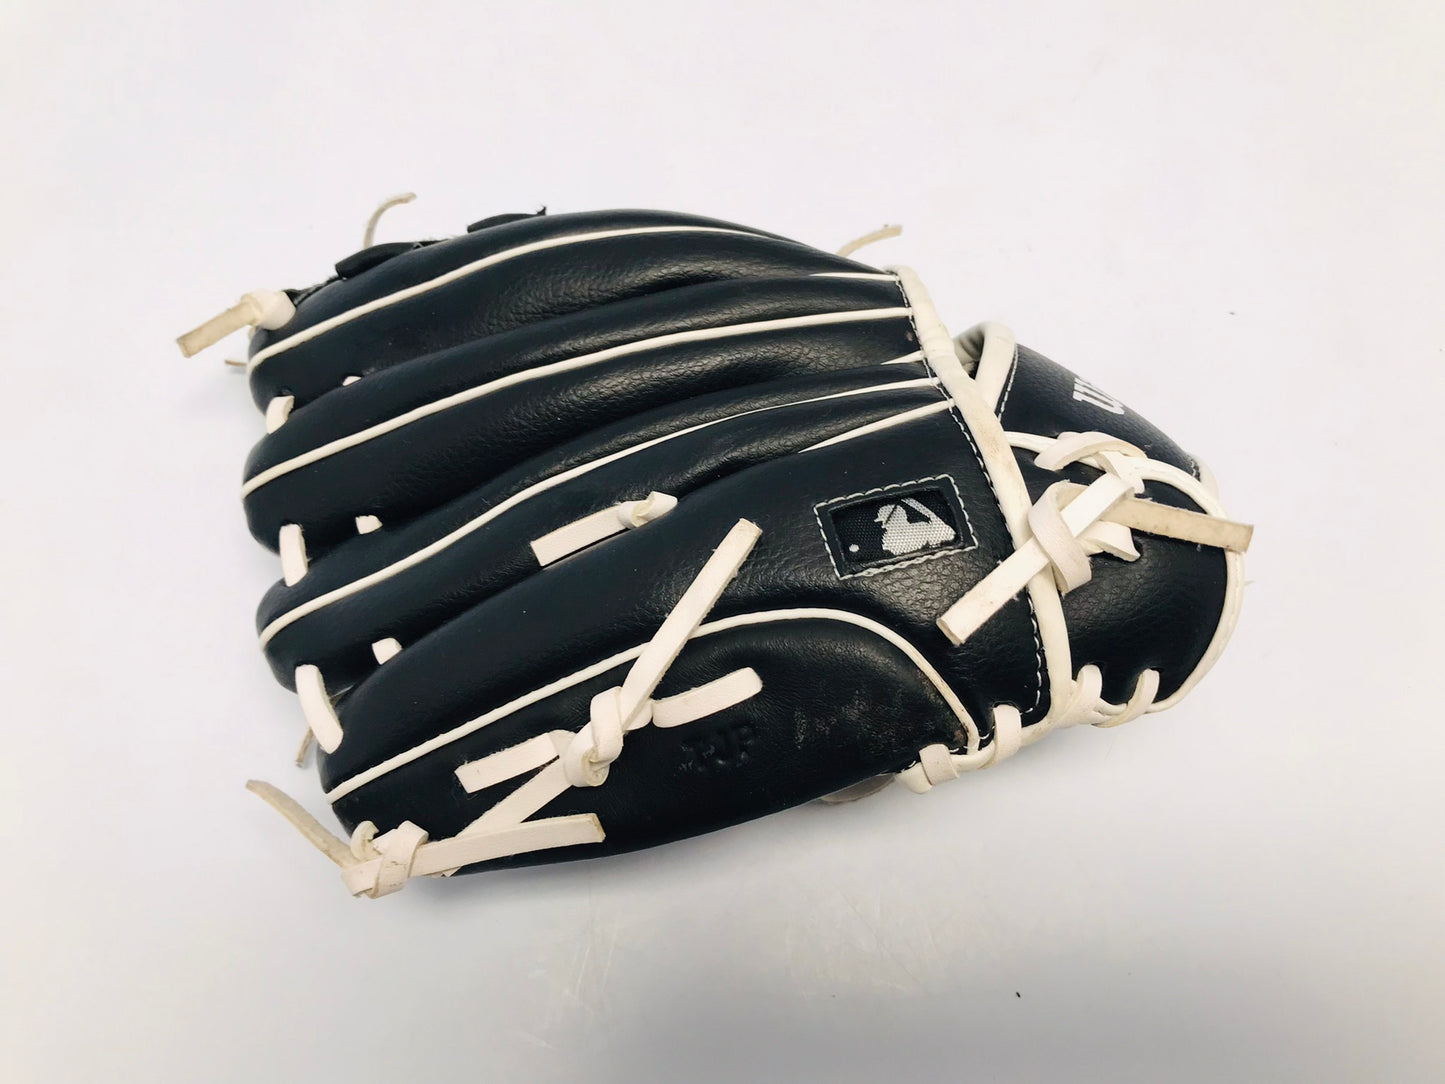 Baseball Glove Child Size 10 inch Wilson A360 Leather Black White Fits Left Hand Like New